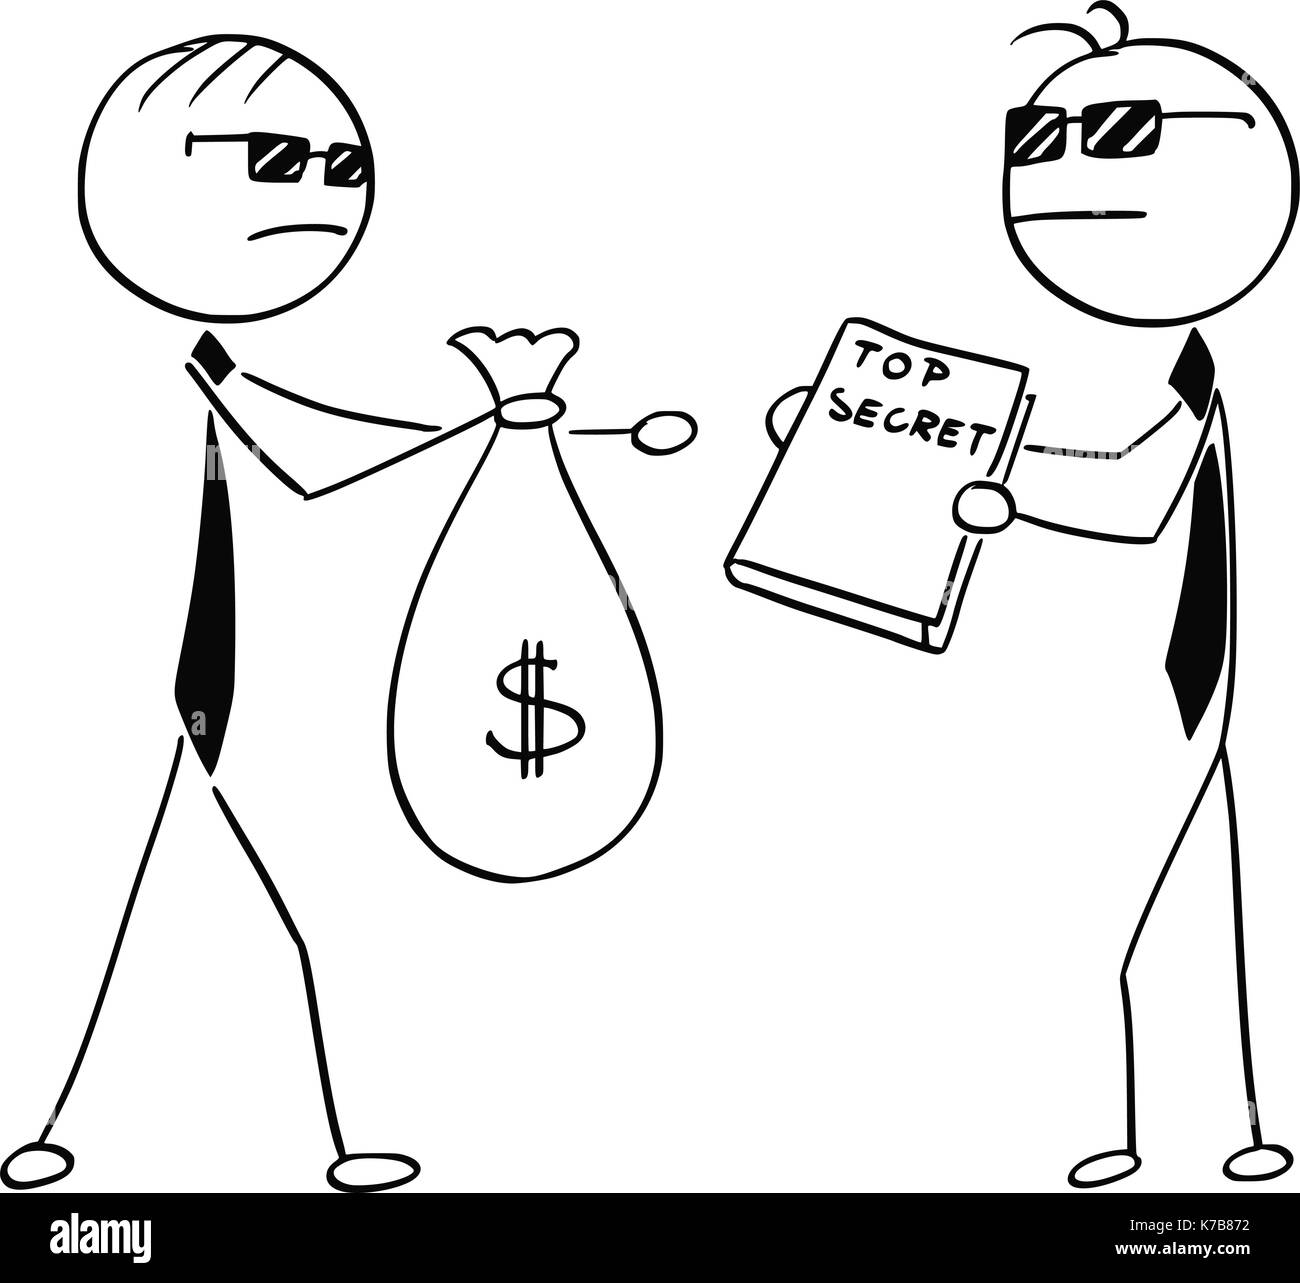 Cartoon stick man illustration of two agents spies business men selling changing top secret for bag of money. Stock Vector